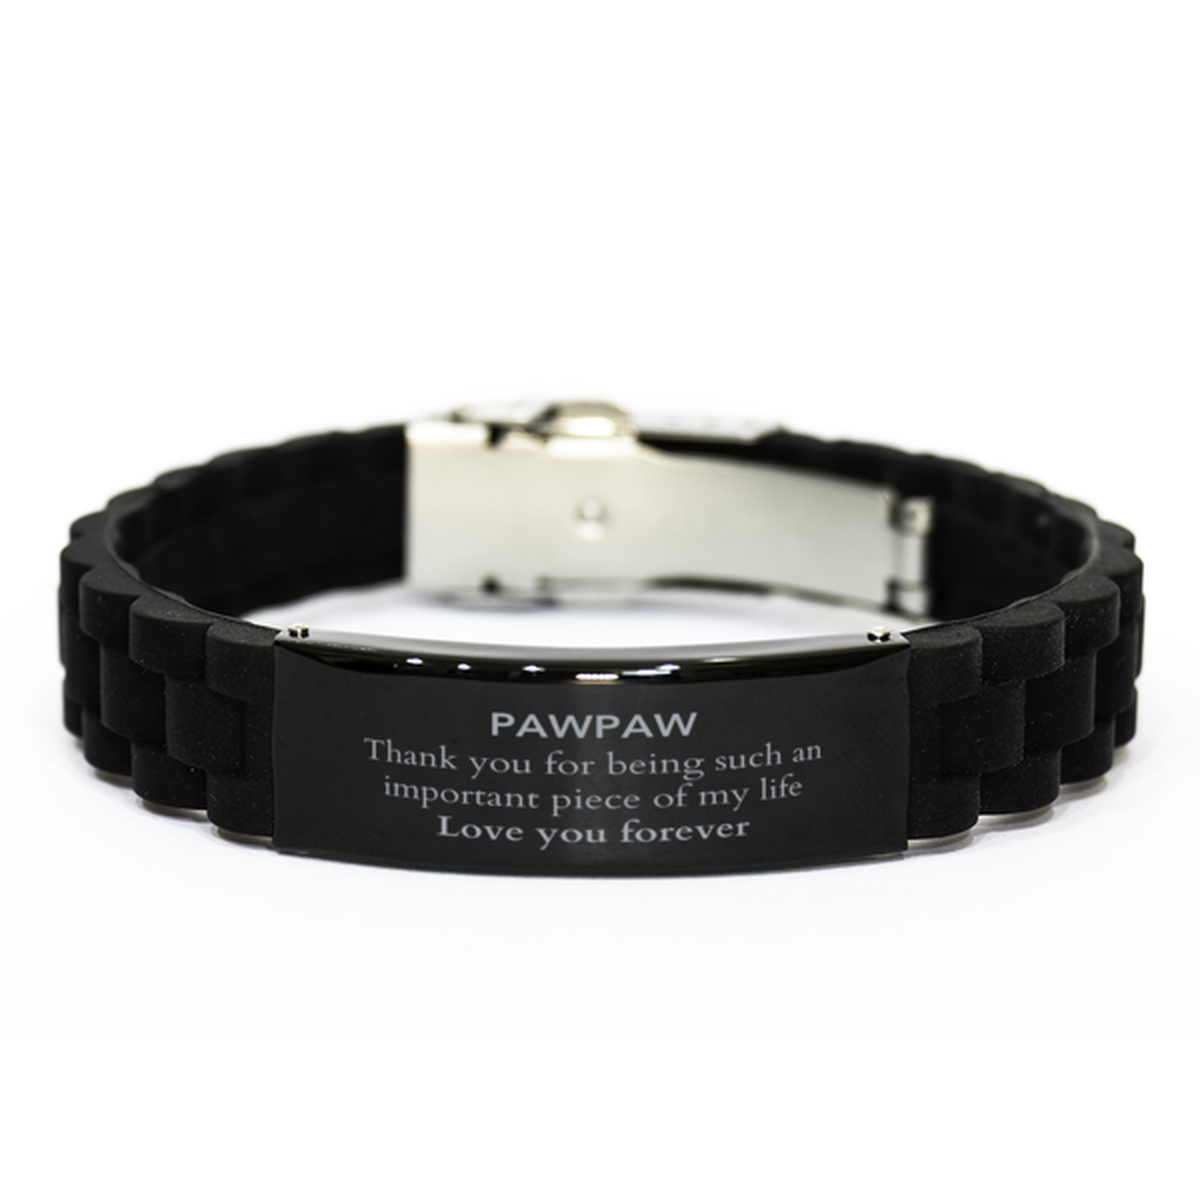 Appropriate Pawpaw Black Glidelock Clasp Bracelet Epic Birthday Gifts for Pawpaw Thank you for being such an important piece of my life Pawpaw Christmas Mothers Fathers Day